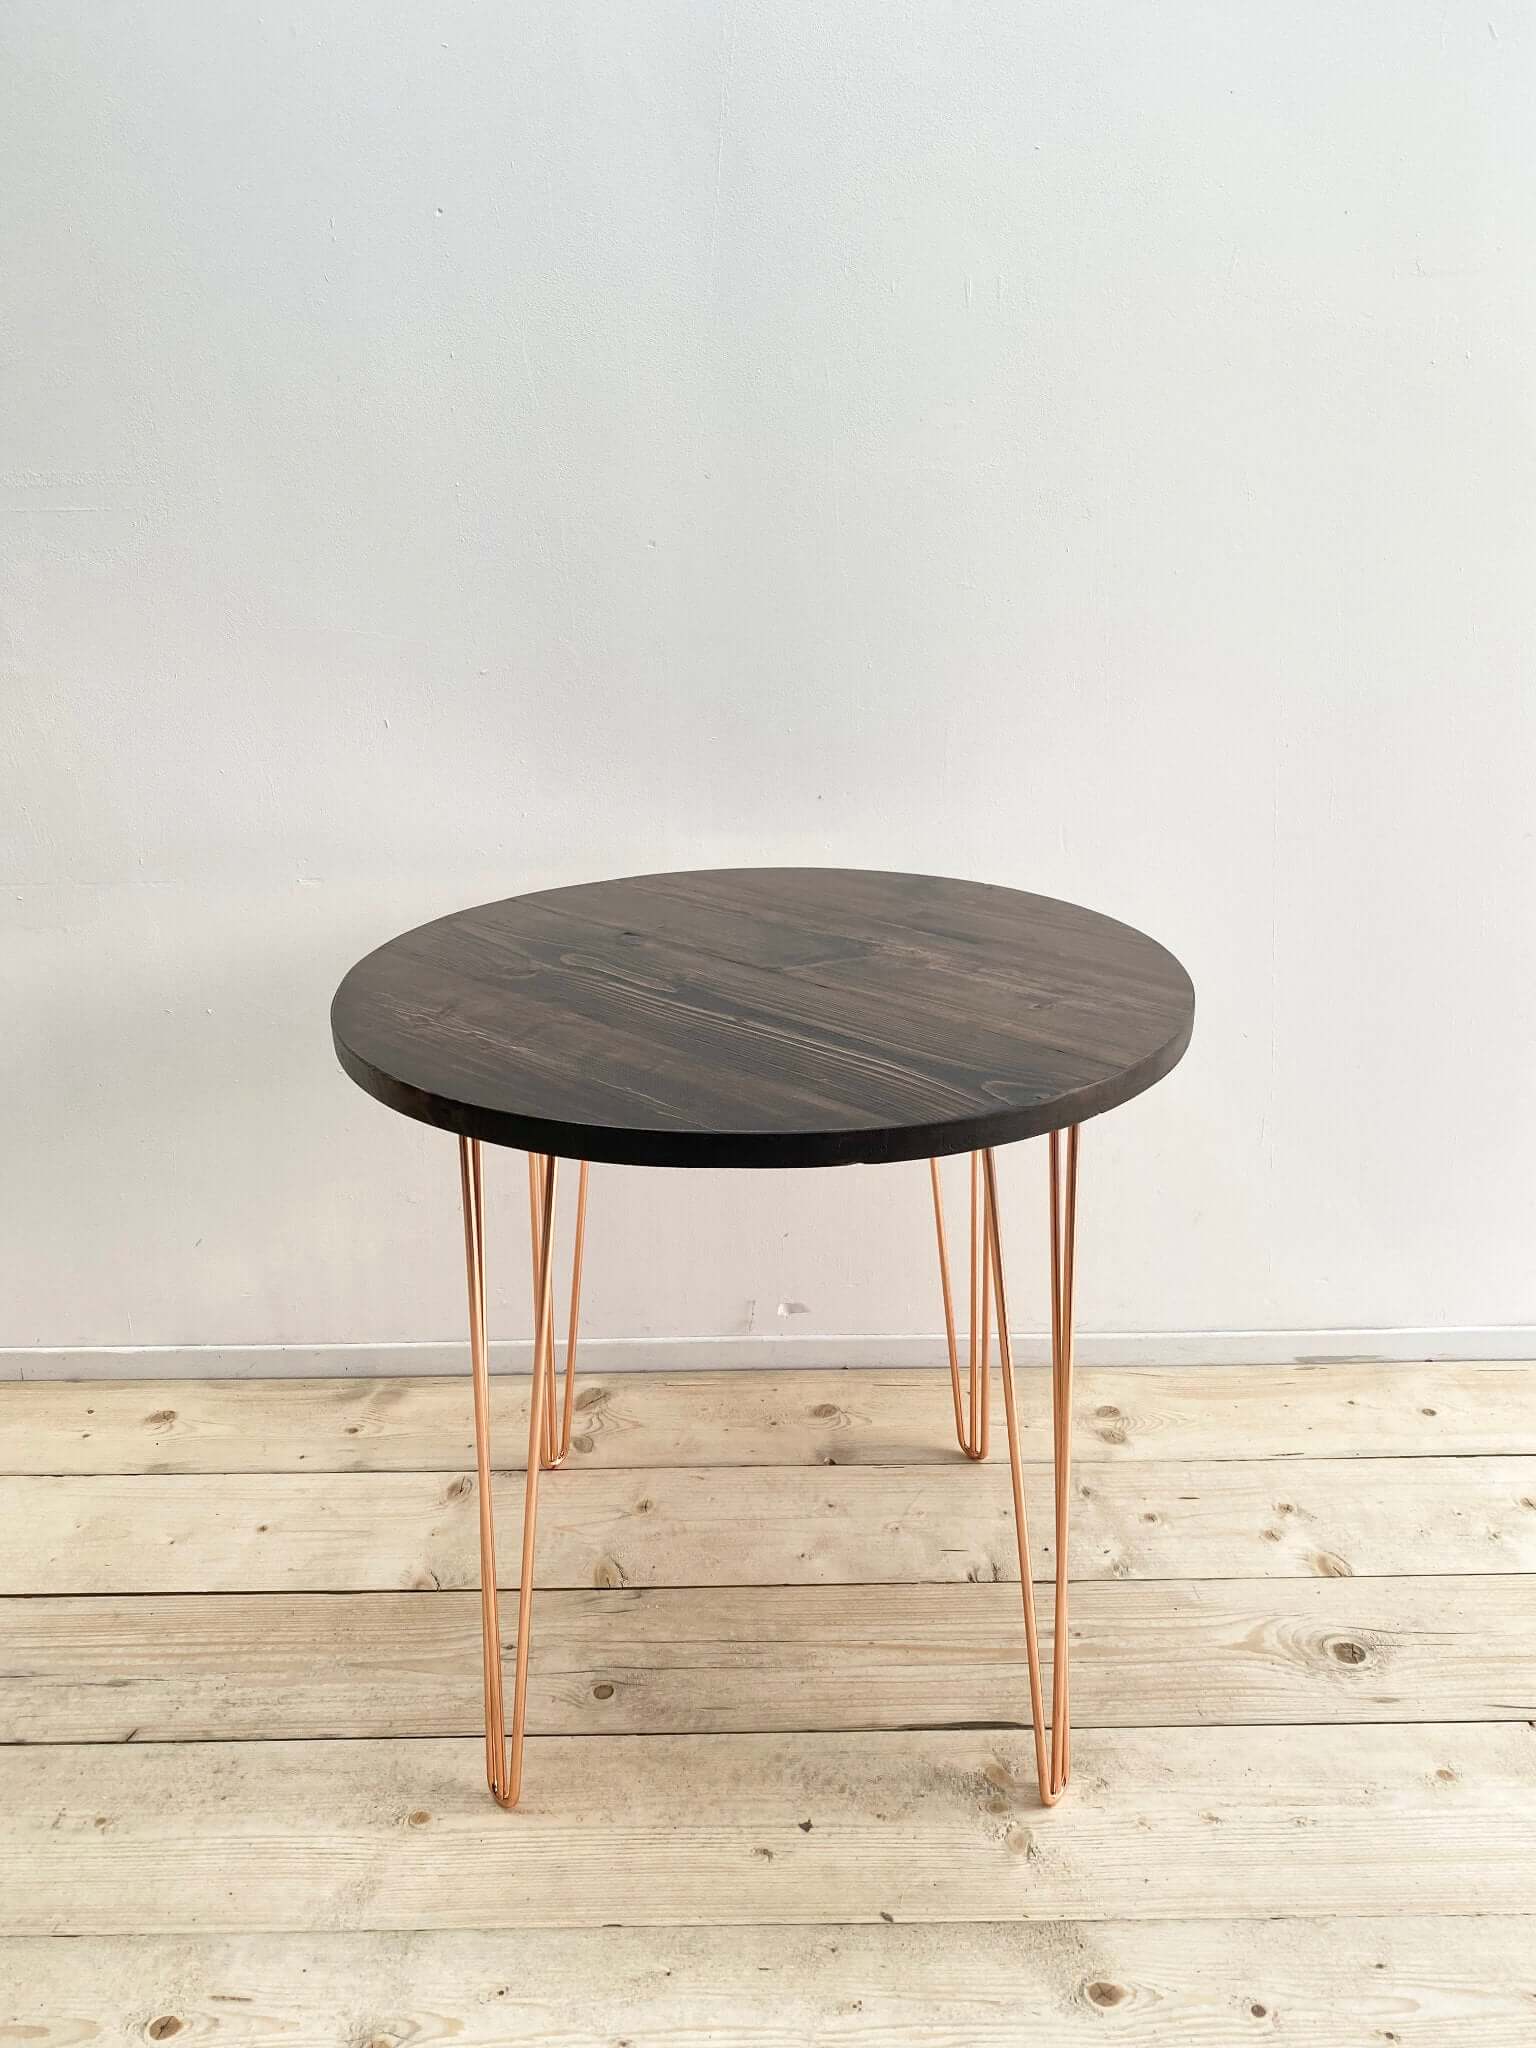 Reclaimed wood circle dining table with hairpin legs.